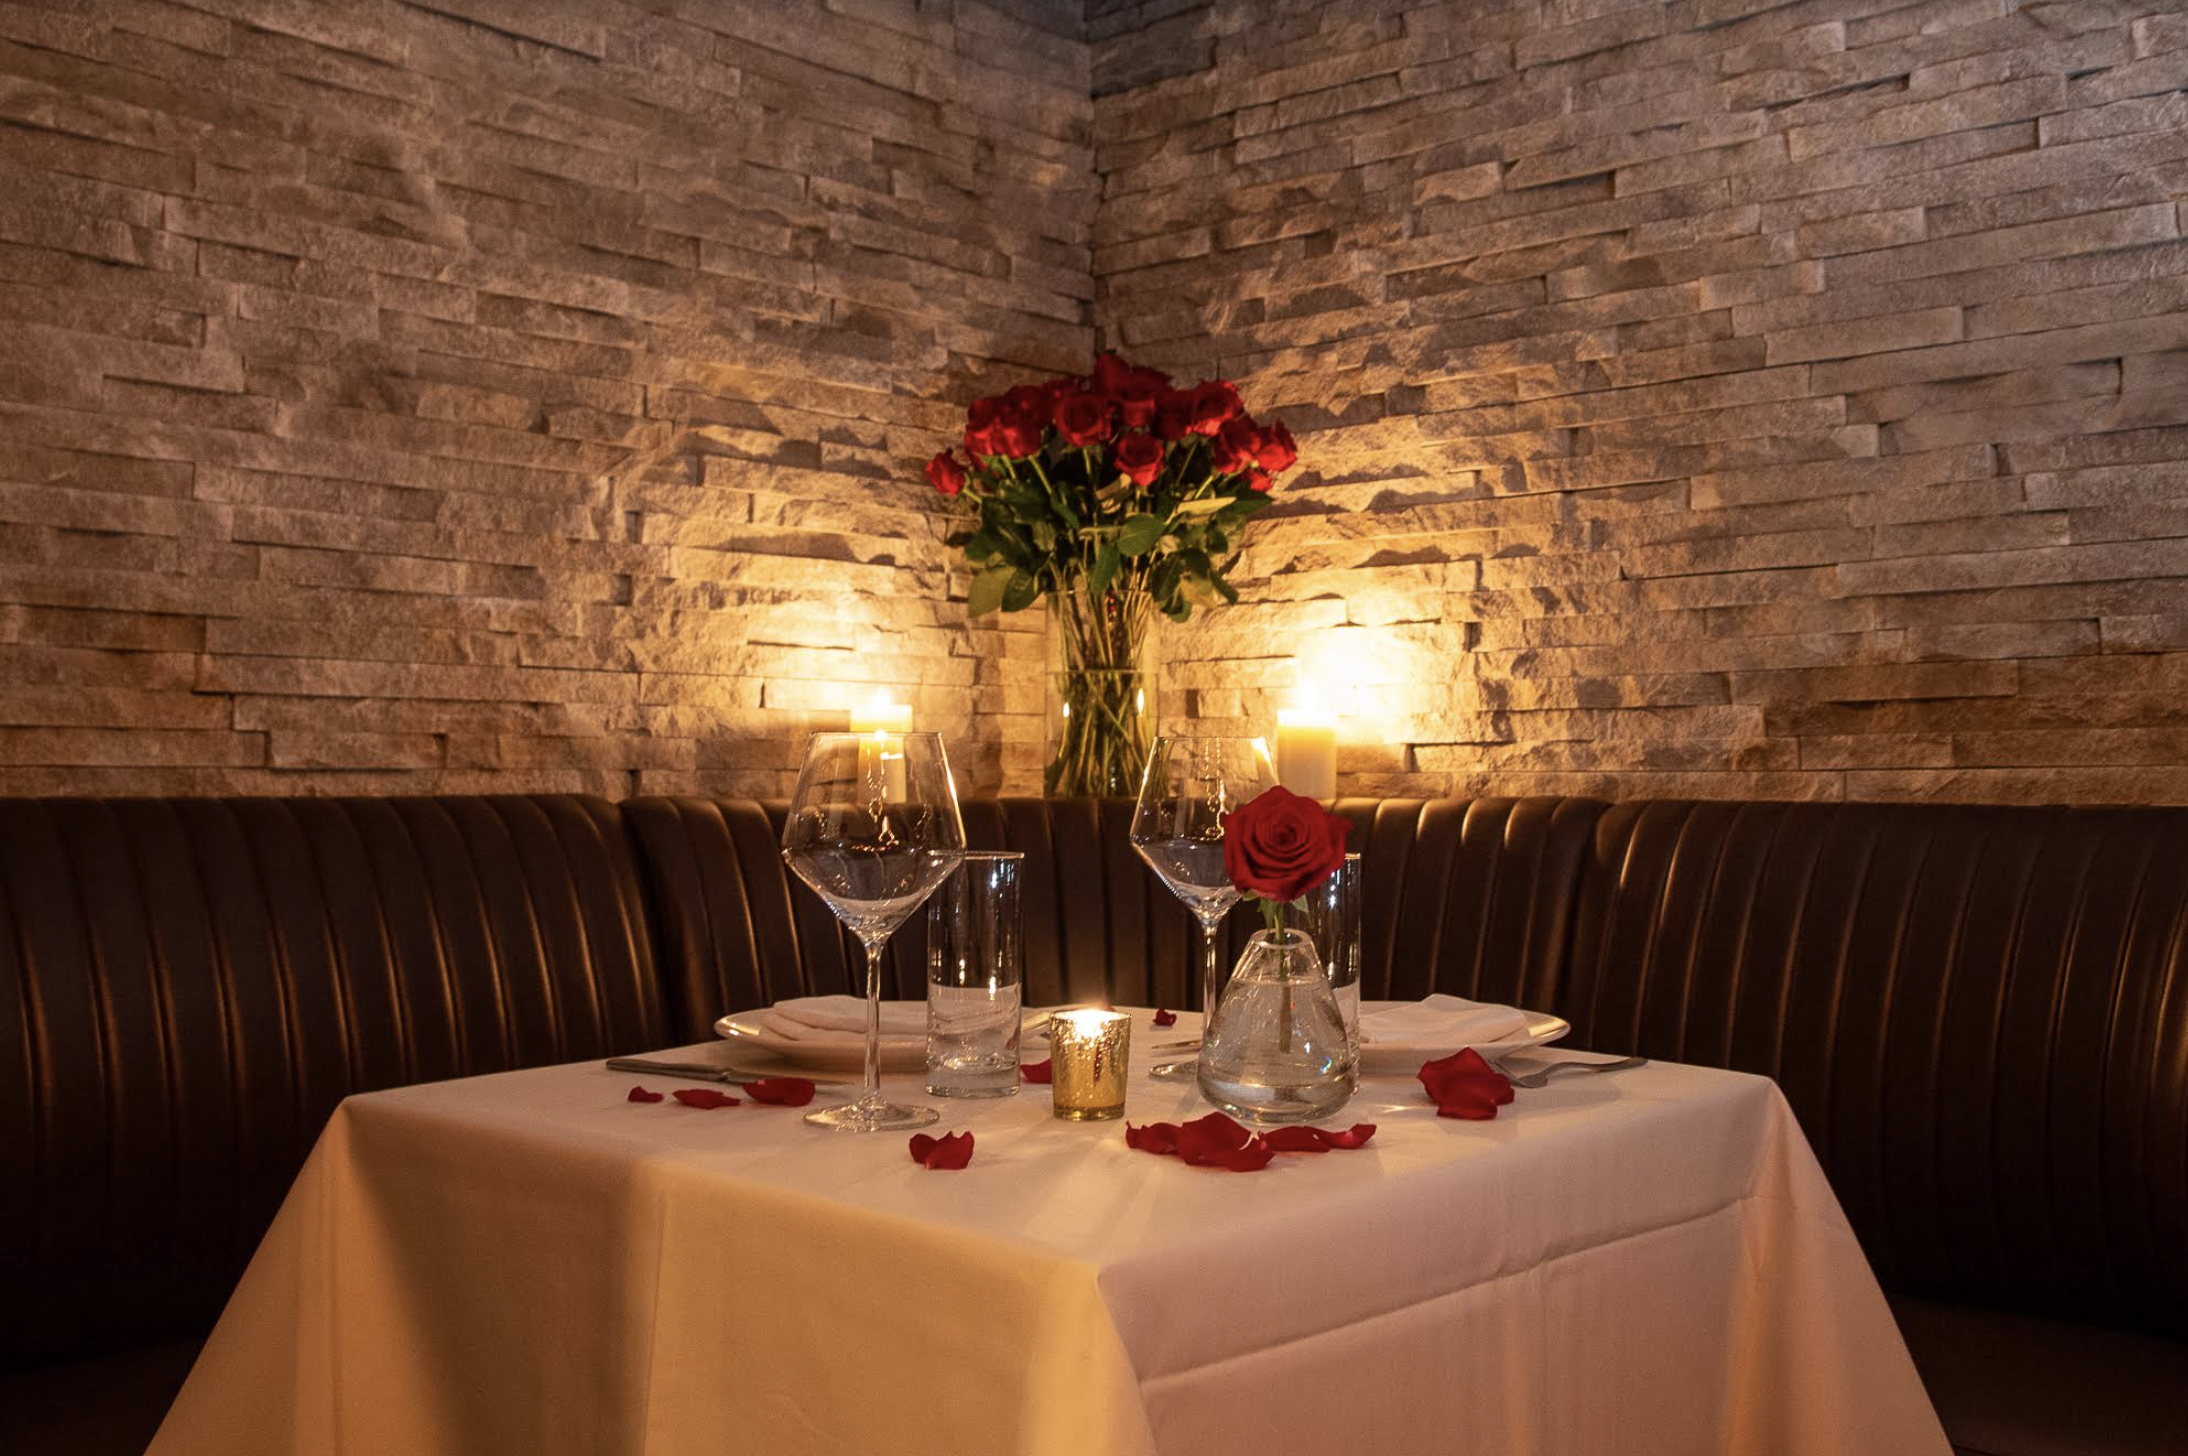 5 Culinary Escapes and Romantic Restaurants for Valentine's Day in New York